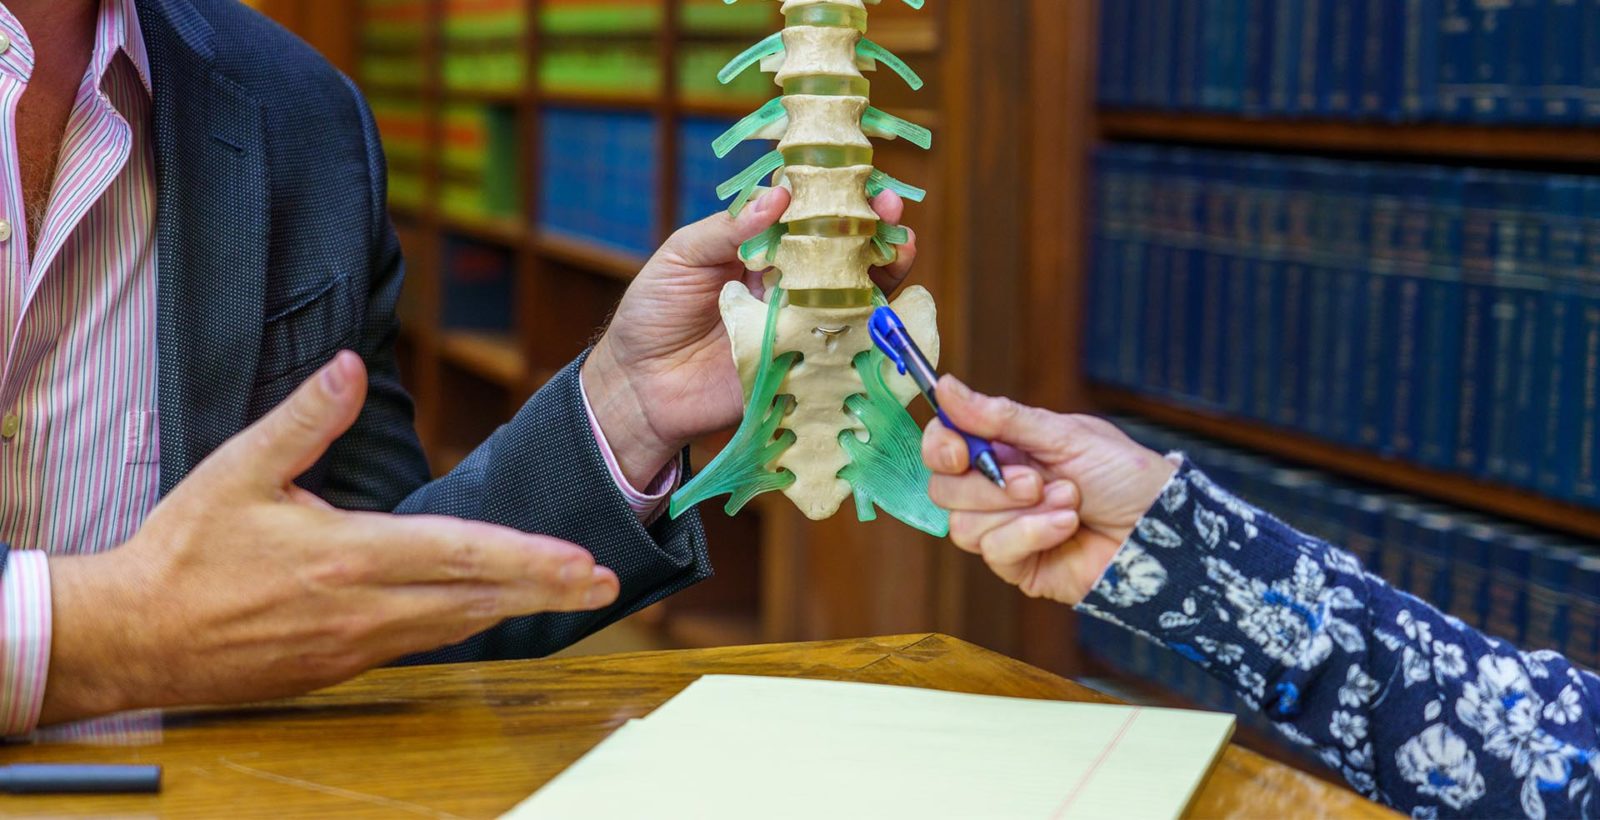 two people in a conversation holding a spine anatomy model